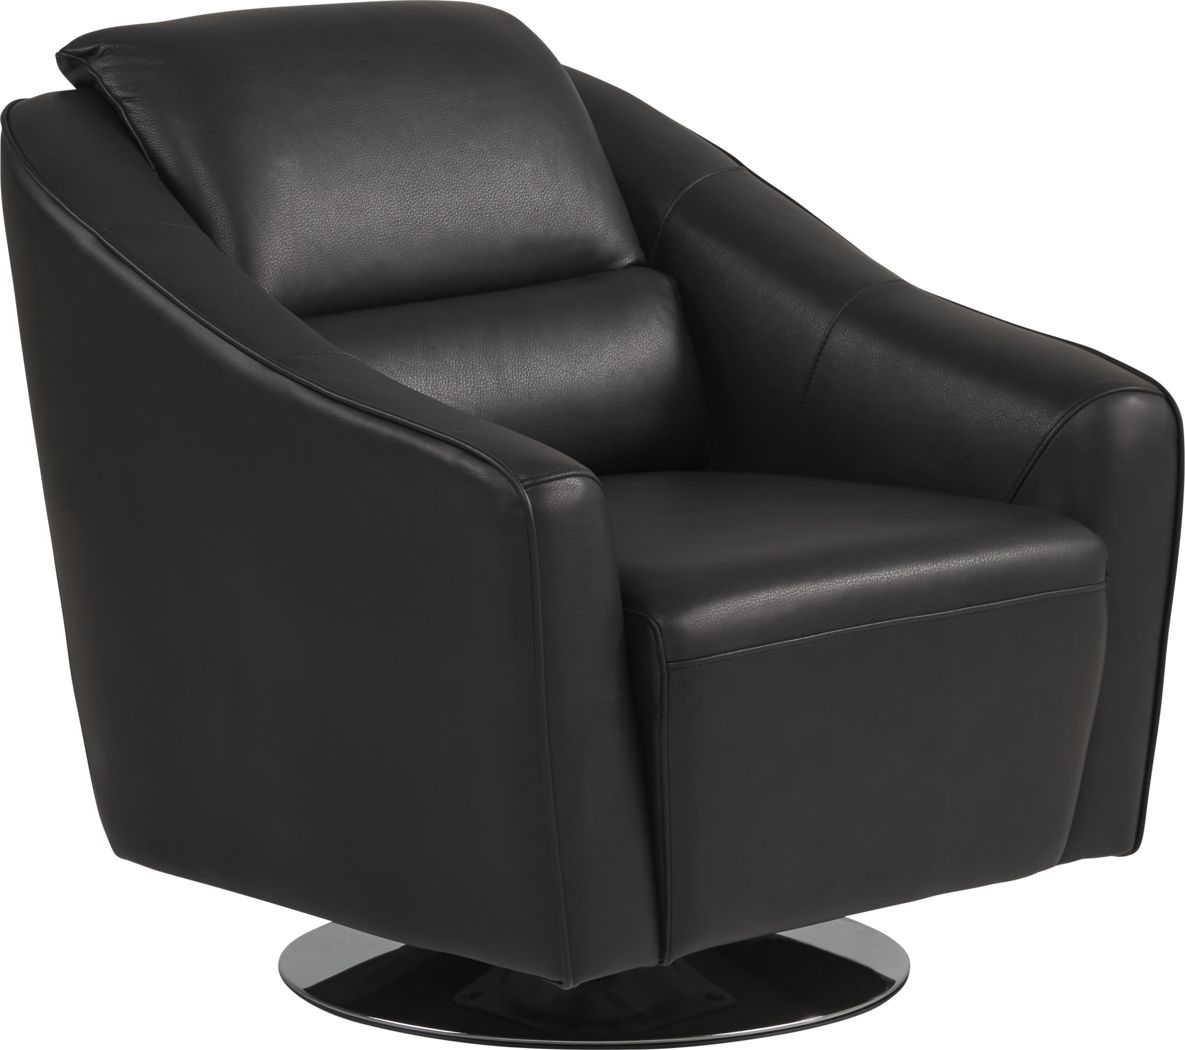 Dolcedo Black Leather Swivel Chair, Black Leather Swivel Chairs